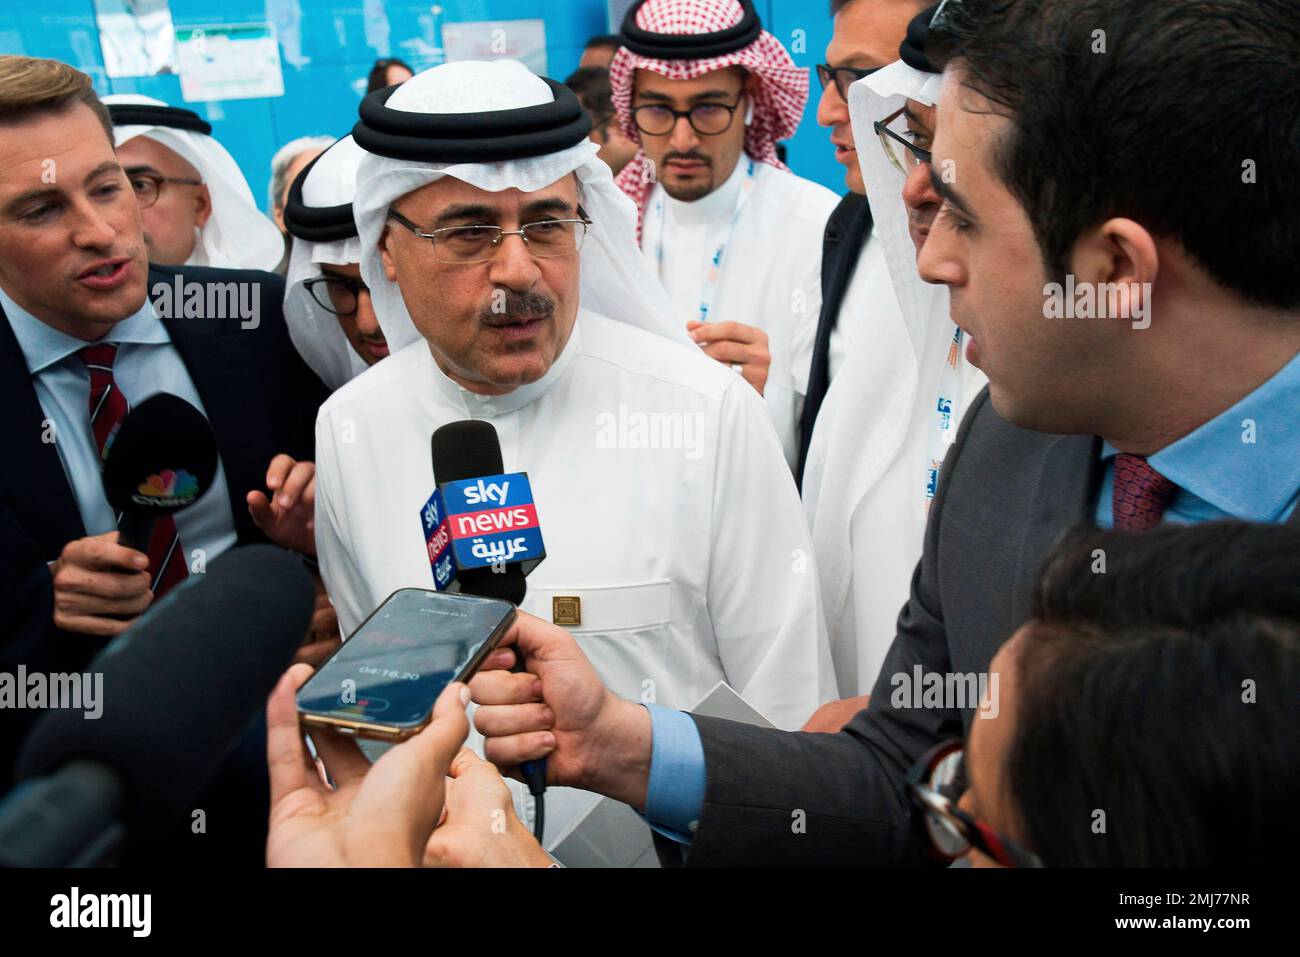 Amin Nasser, the chairman and CEO of the state-run oil giant Saudi Aramco,  speaks to journalists at the World Energy Congress in Abu Dhabi, United Arab  Emirates, Tuesday, Sept. 10, 2019. Nasser